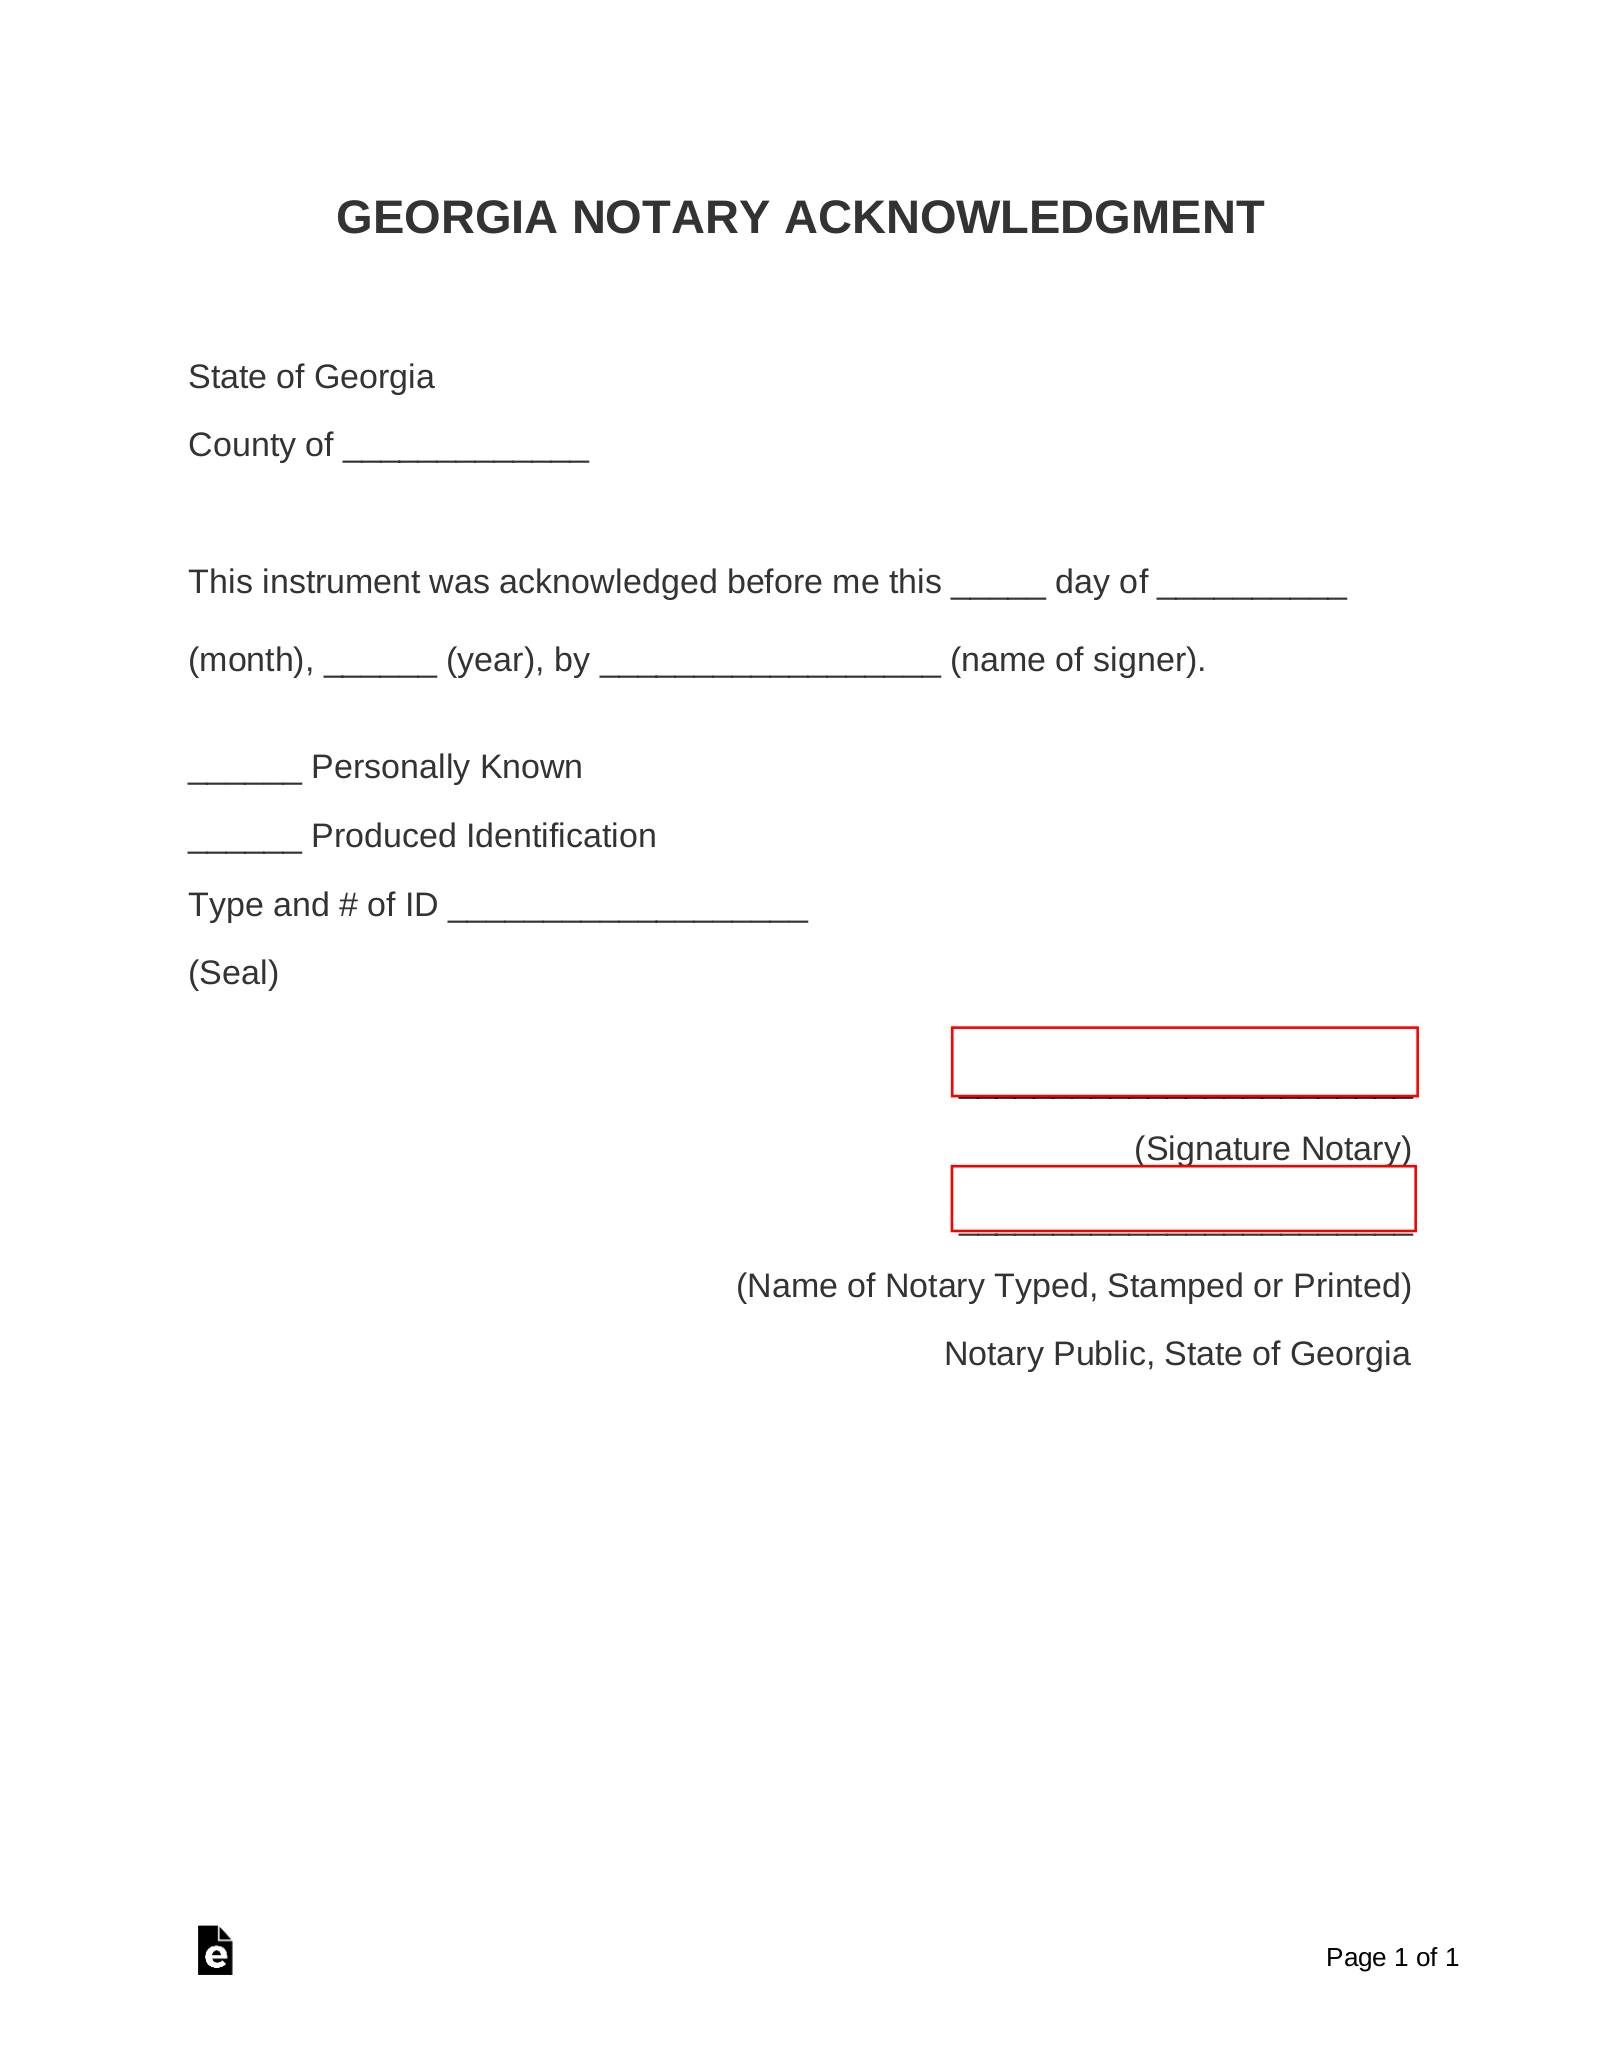 Georgia Notary Acknowledgment Form